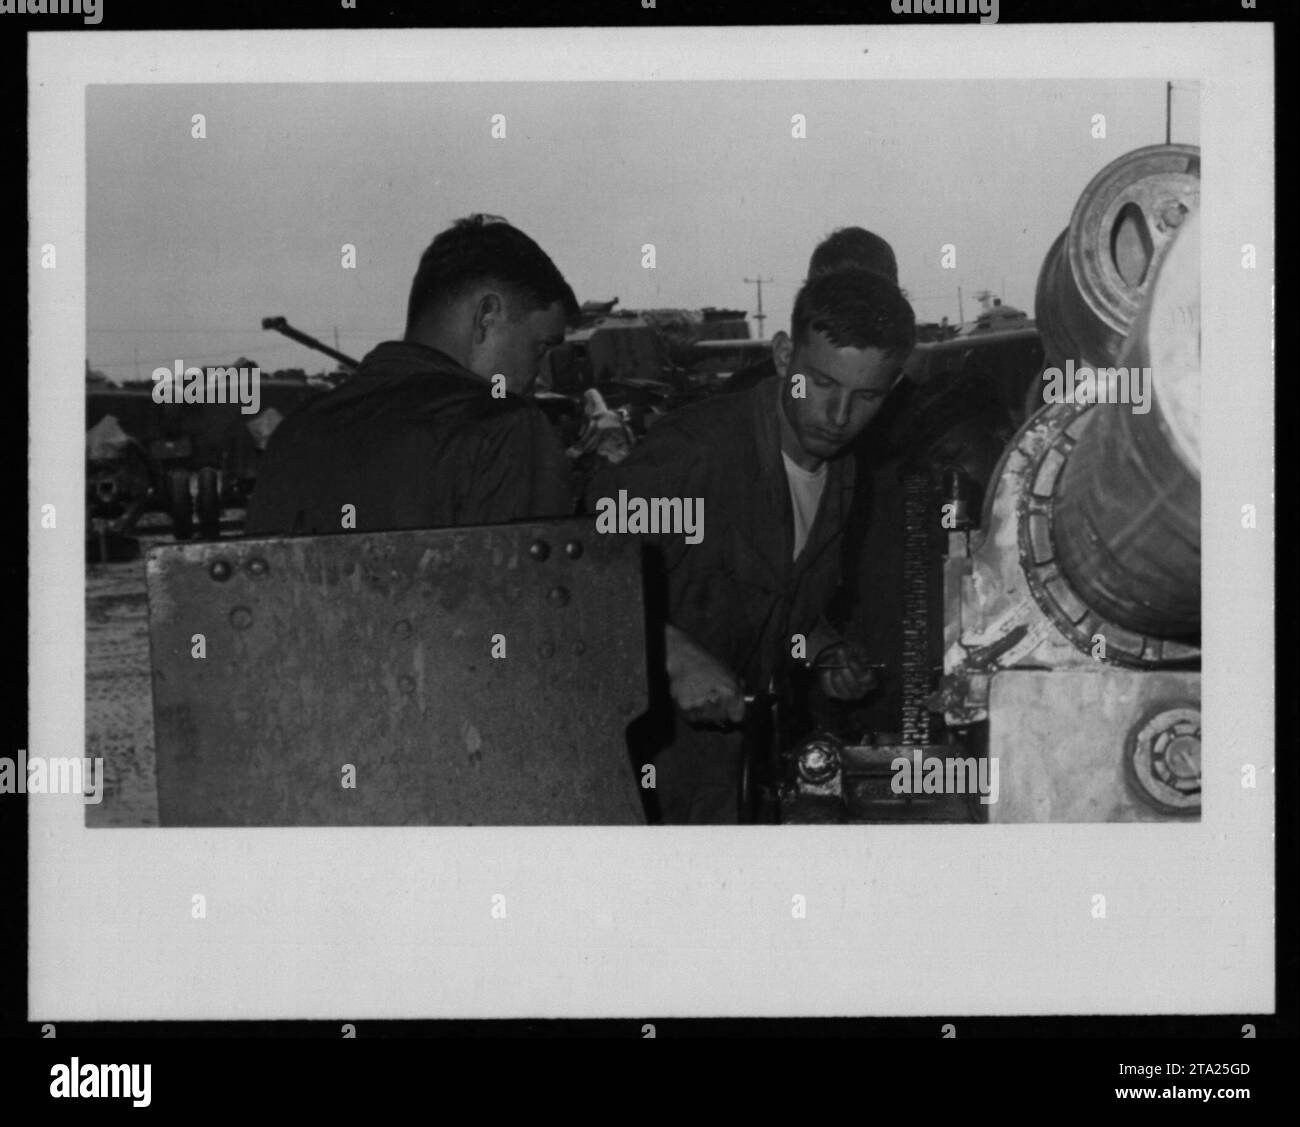 Maintenance crew members working on a damaged military vehicle during the Vietnam War. The image showcases the essential role of maintenance in keeping equipment and vehicles operational in demanding war environments. Stock Photo